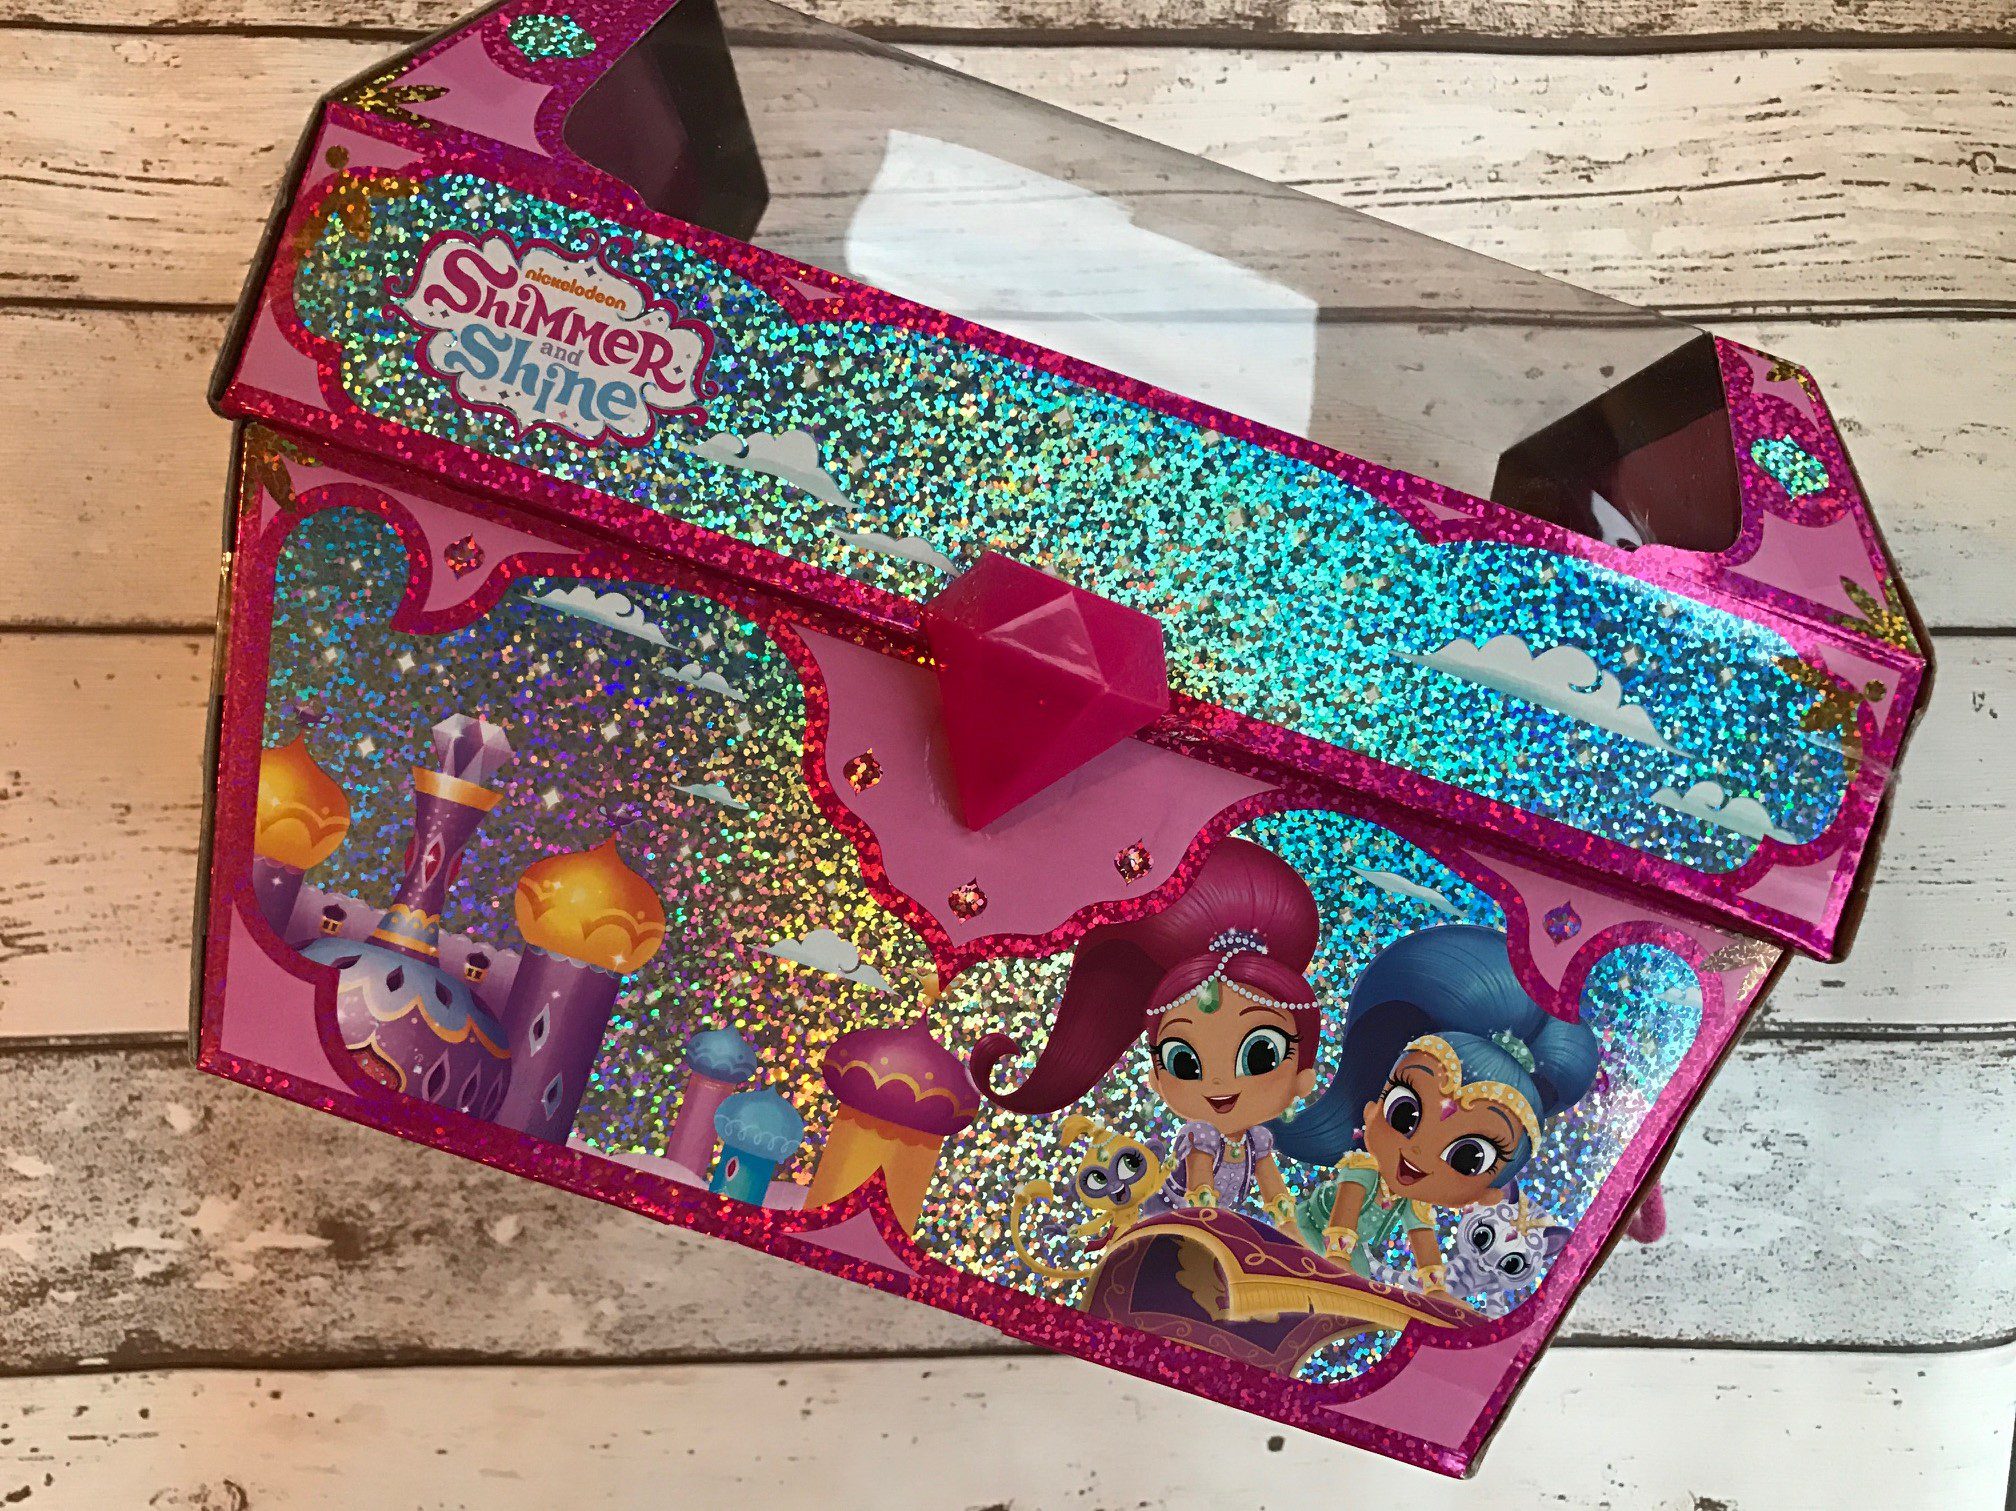 REVIEW – Shimmer & Shine Dress Up Trunk